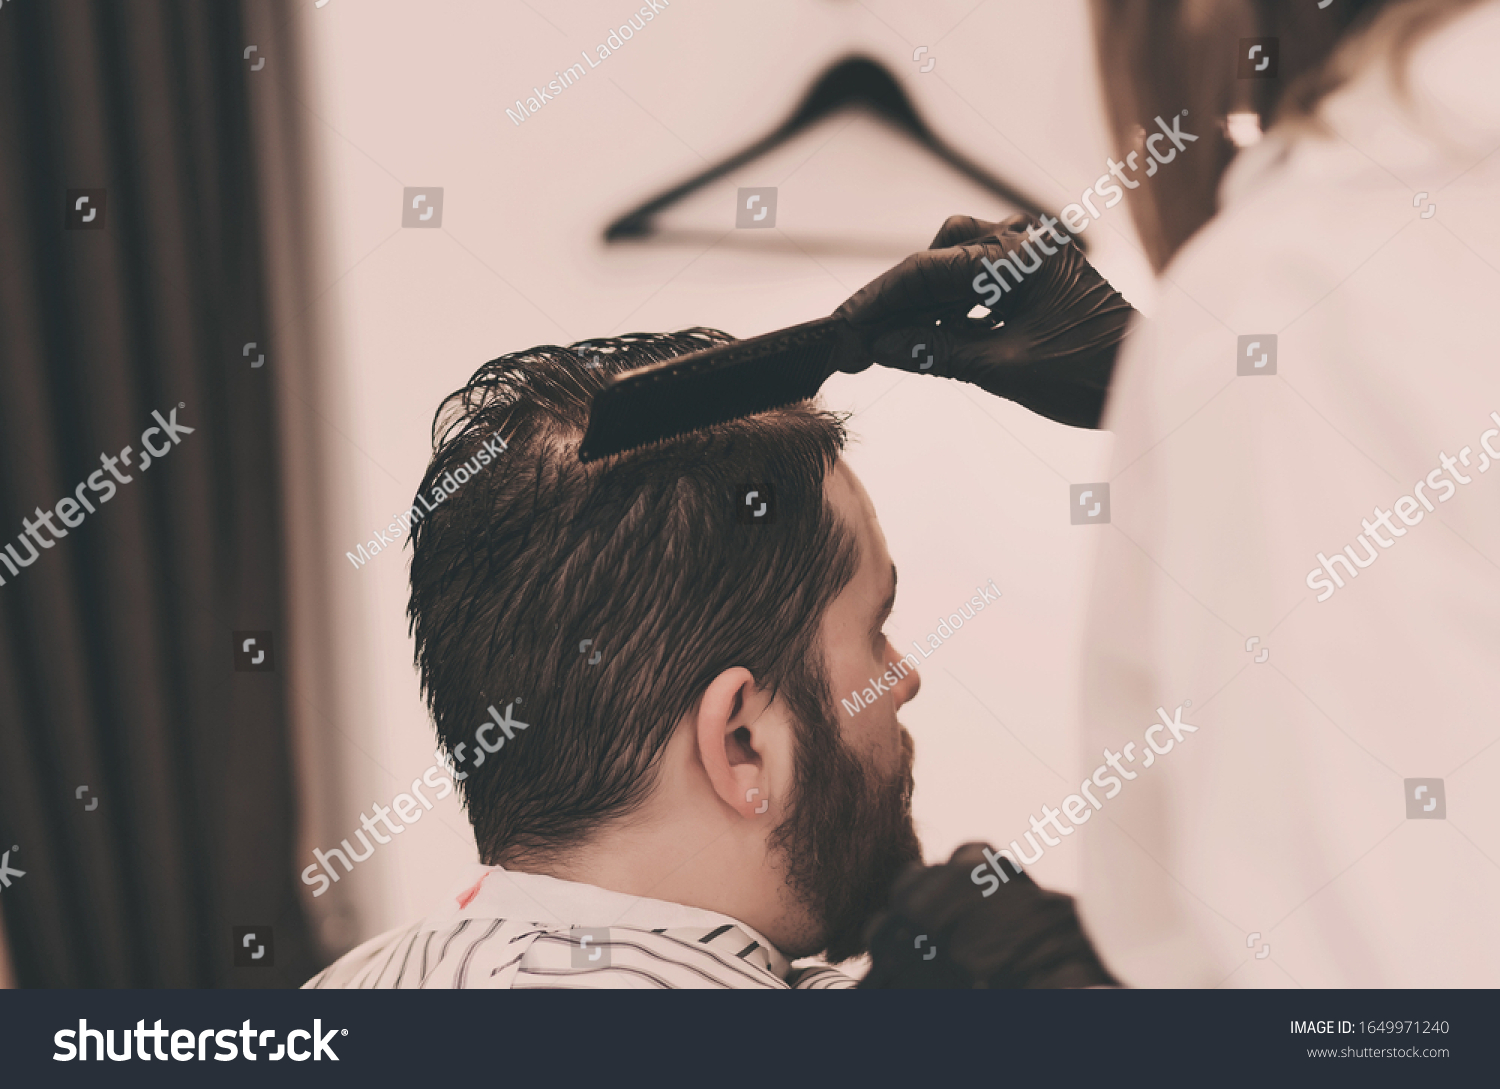 master combs the hair and beards of men in the Barber shop, the Barber makes a hairstyle for a bearded man #1649971240